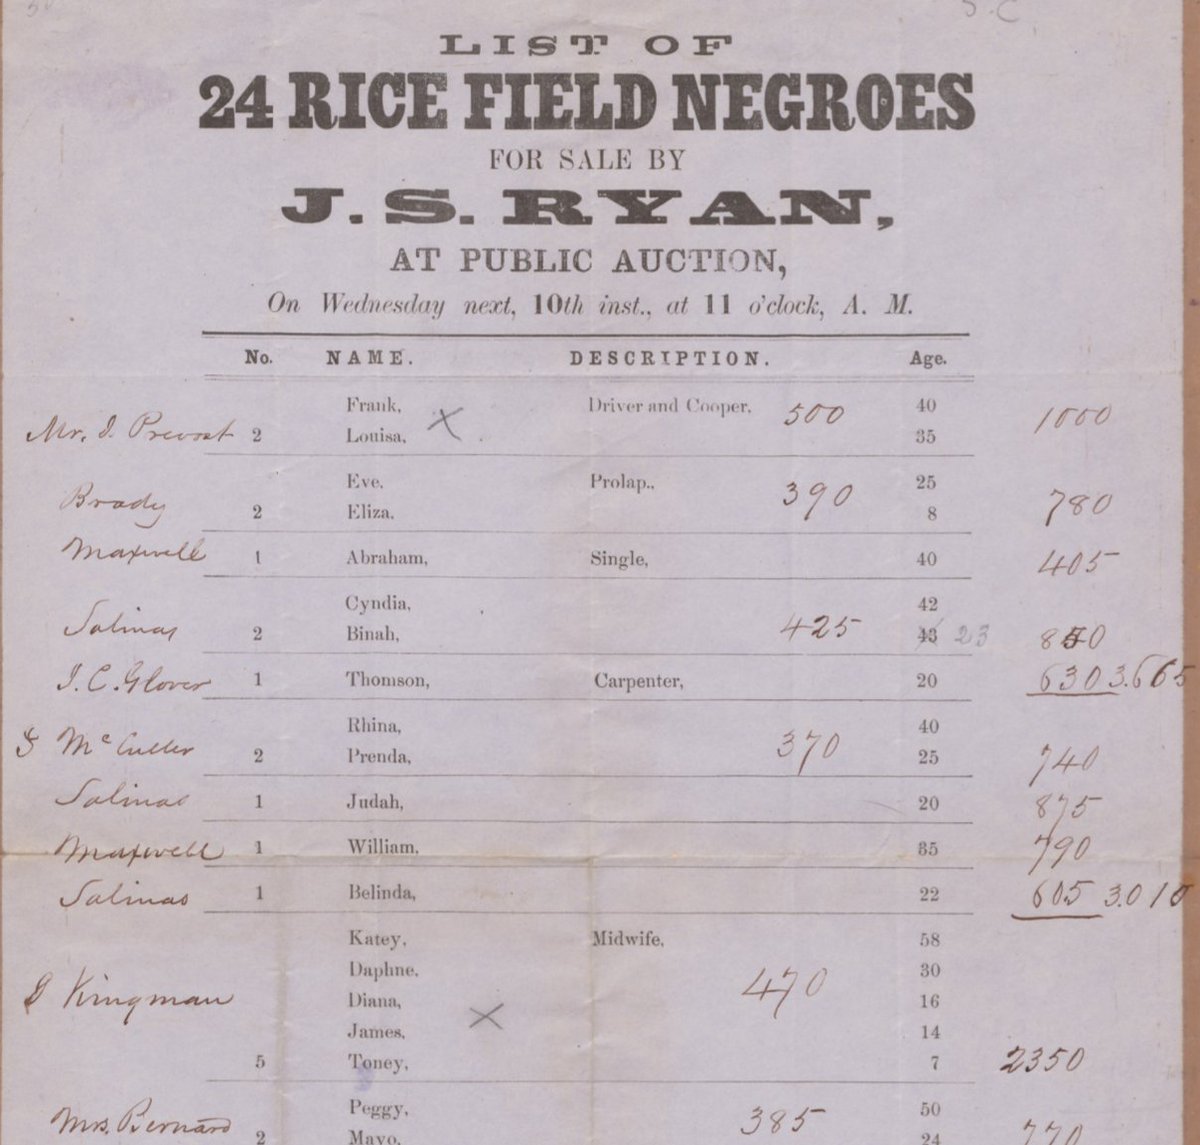 His nephew J.S. Ryan was also a slave trader in South Carolina.